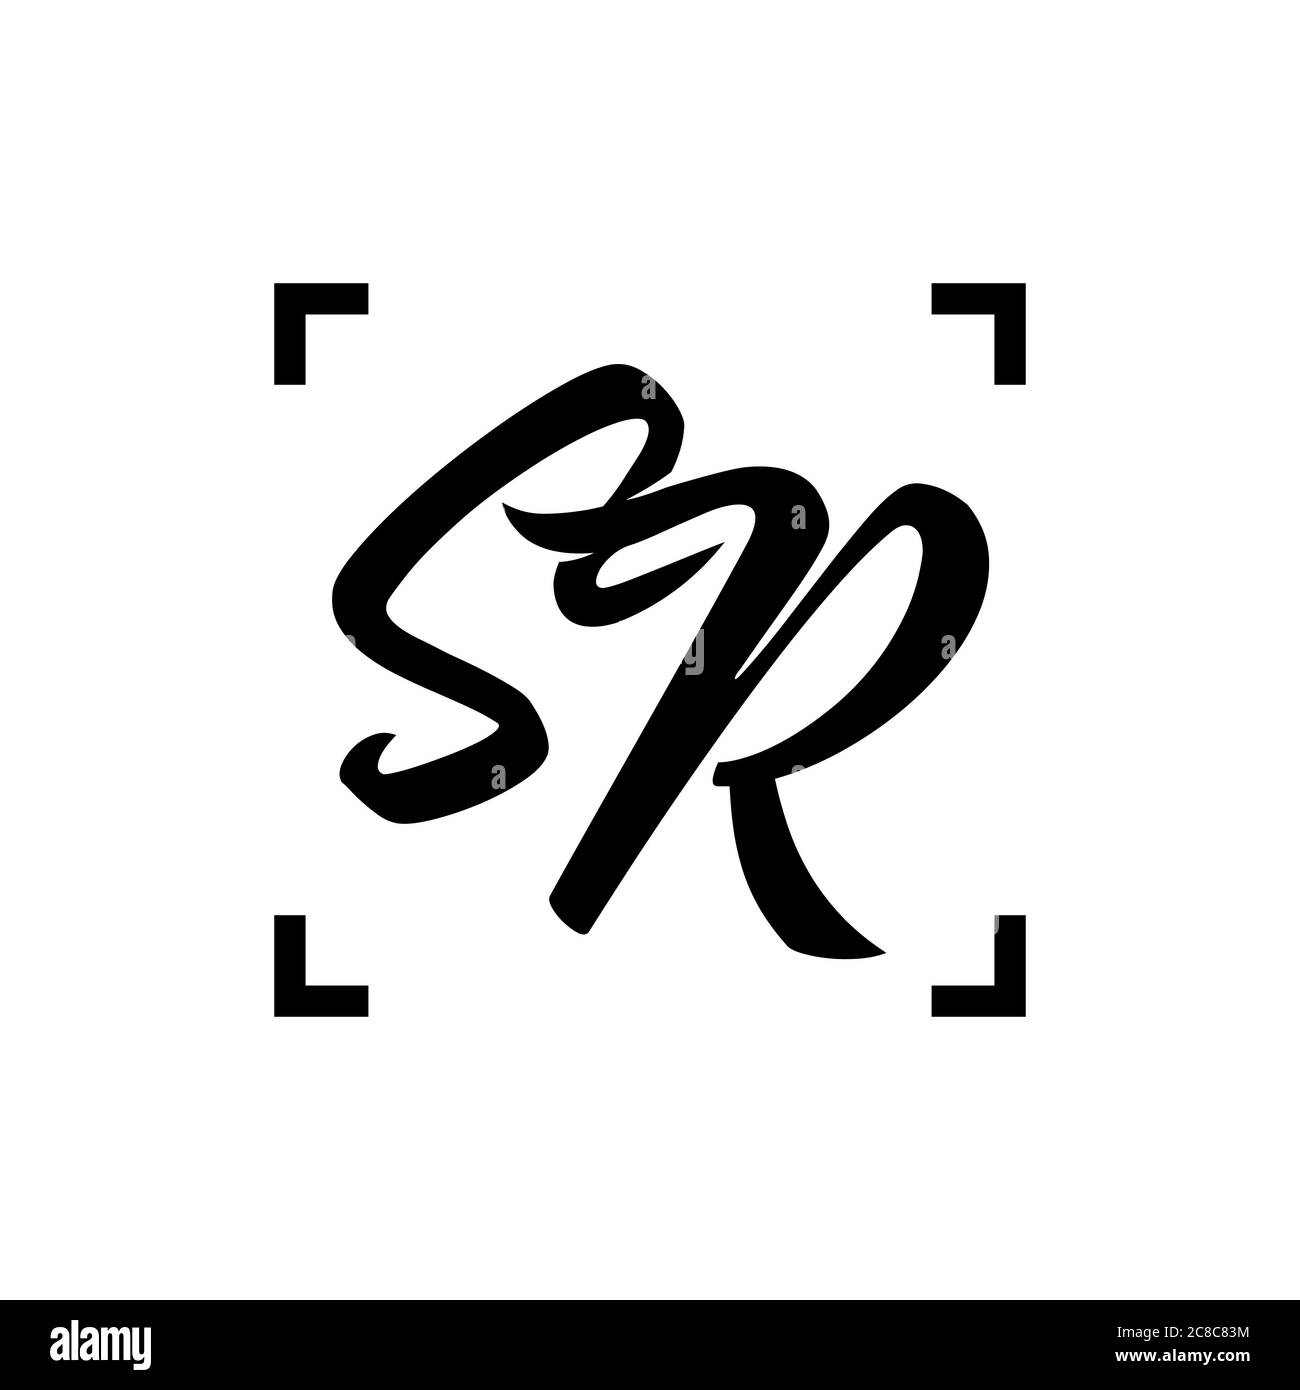 SR Letter Logo Design with Creative Modern Trendy Typography and Black Colors. Stock Vector